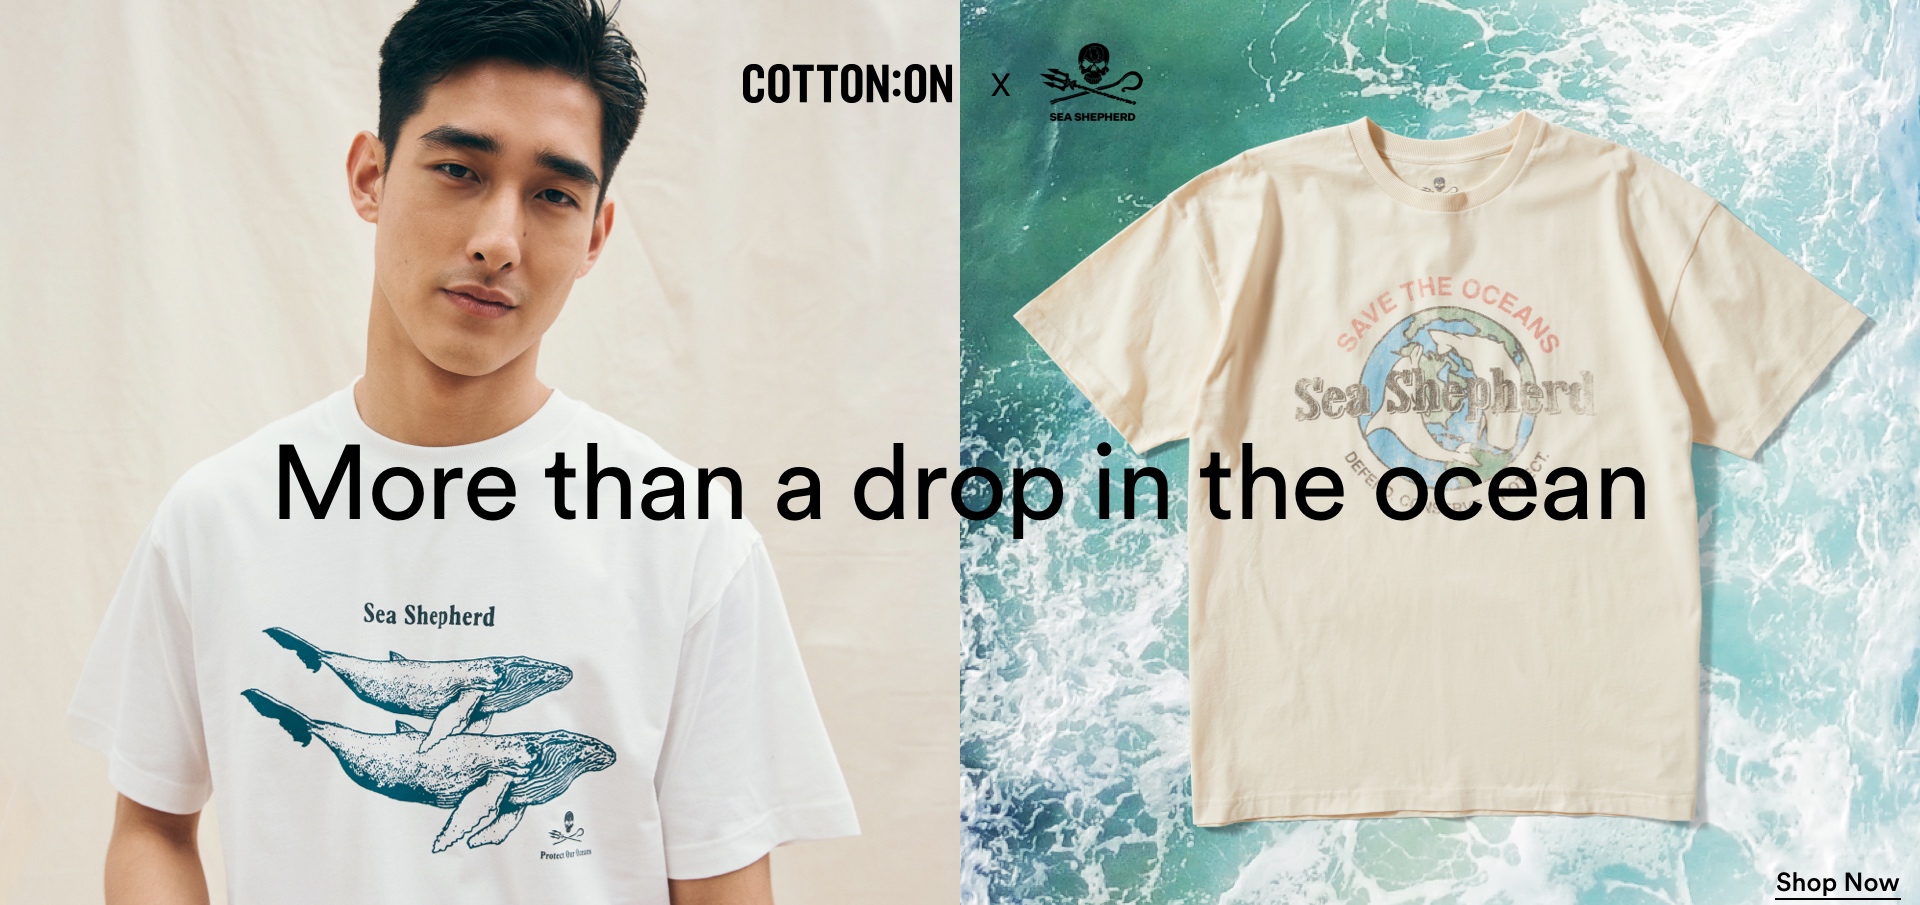 Cotton On x Sea Shepherd. More than a drop in the ocean. Click to Shop.